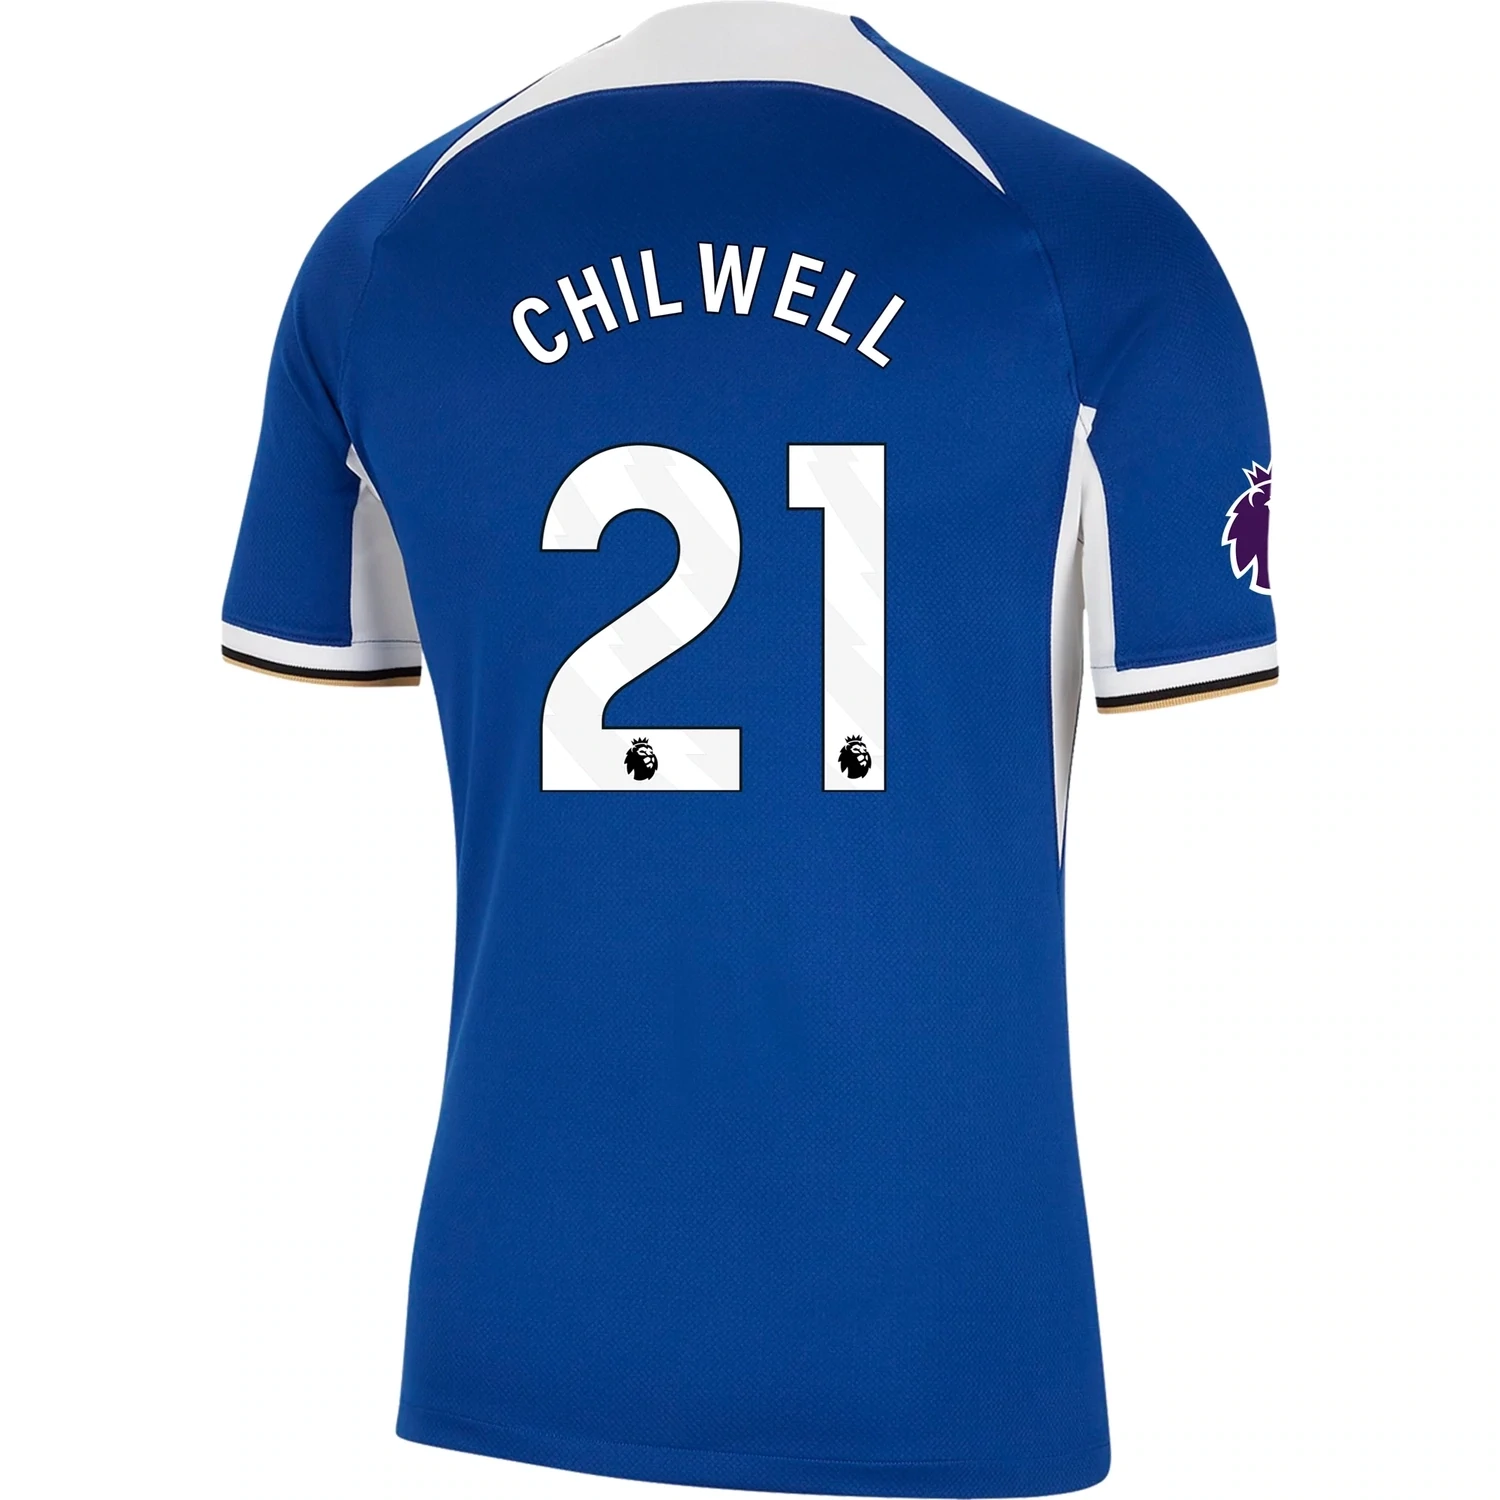 Ben Chilwell #21 Chelsea Home Soccer Jersey 23-24